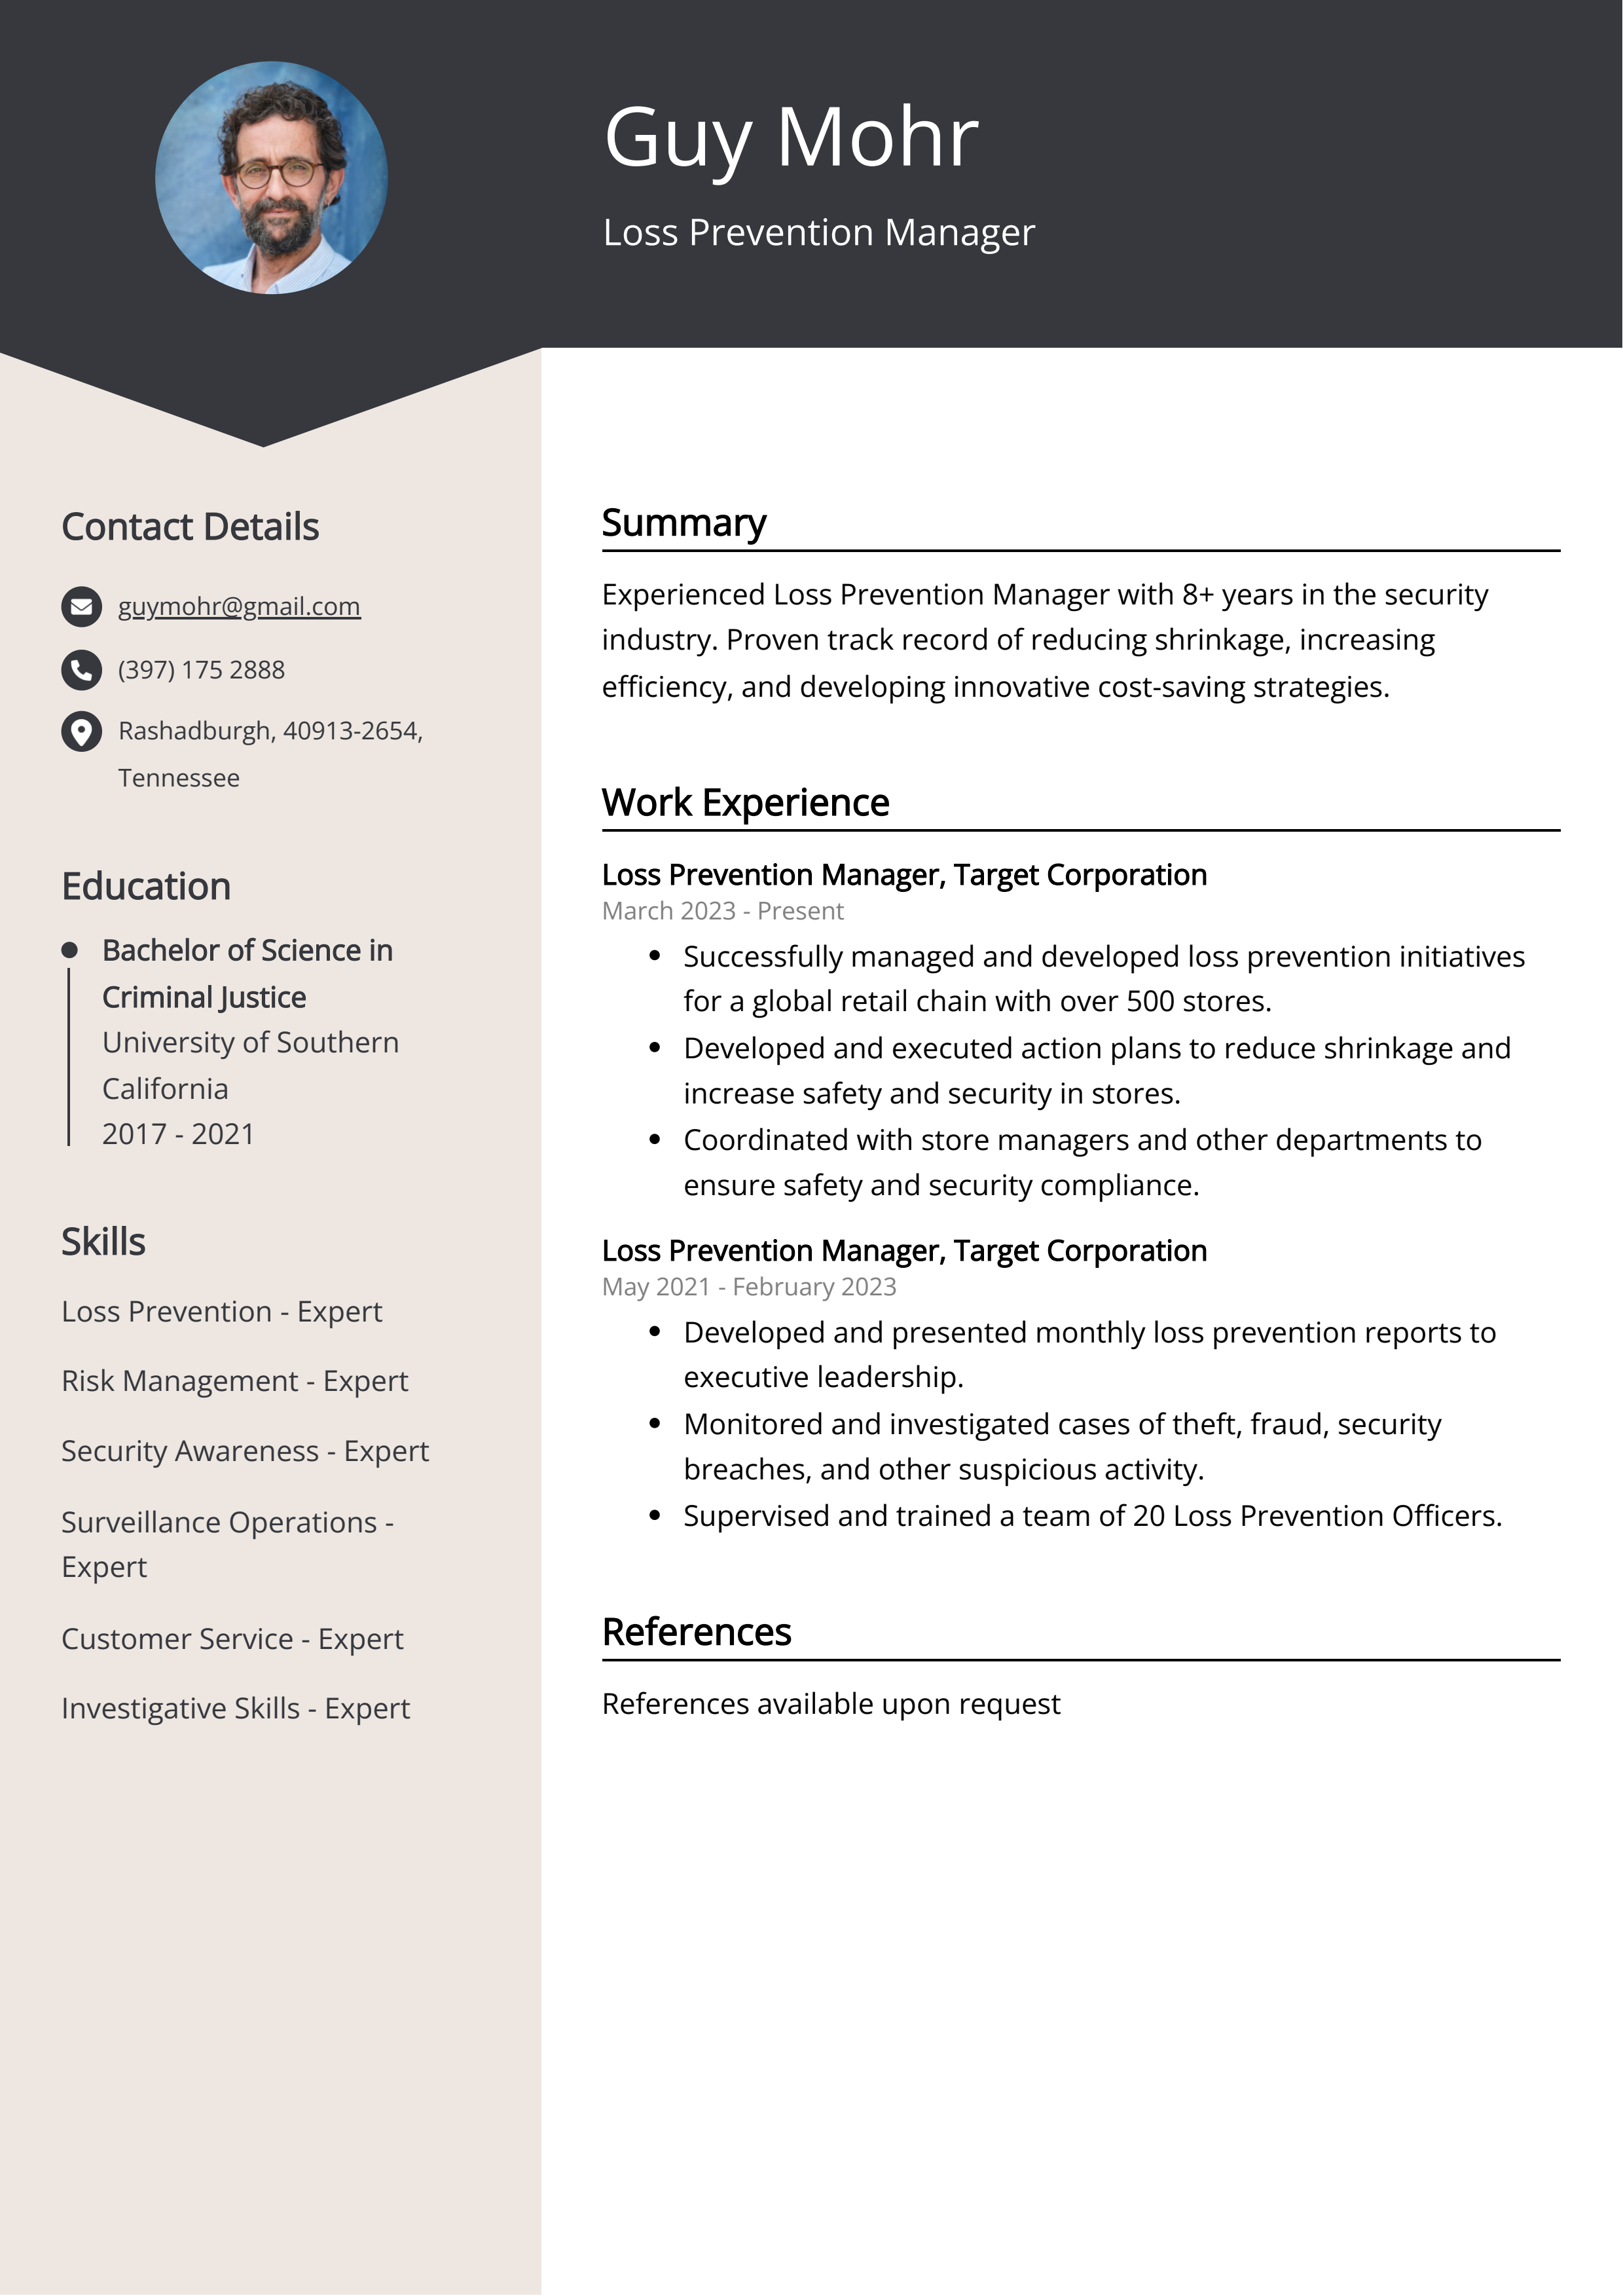 Loss Prevention Manager Resume Example